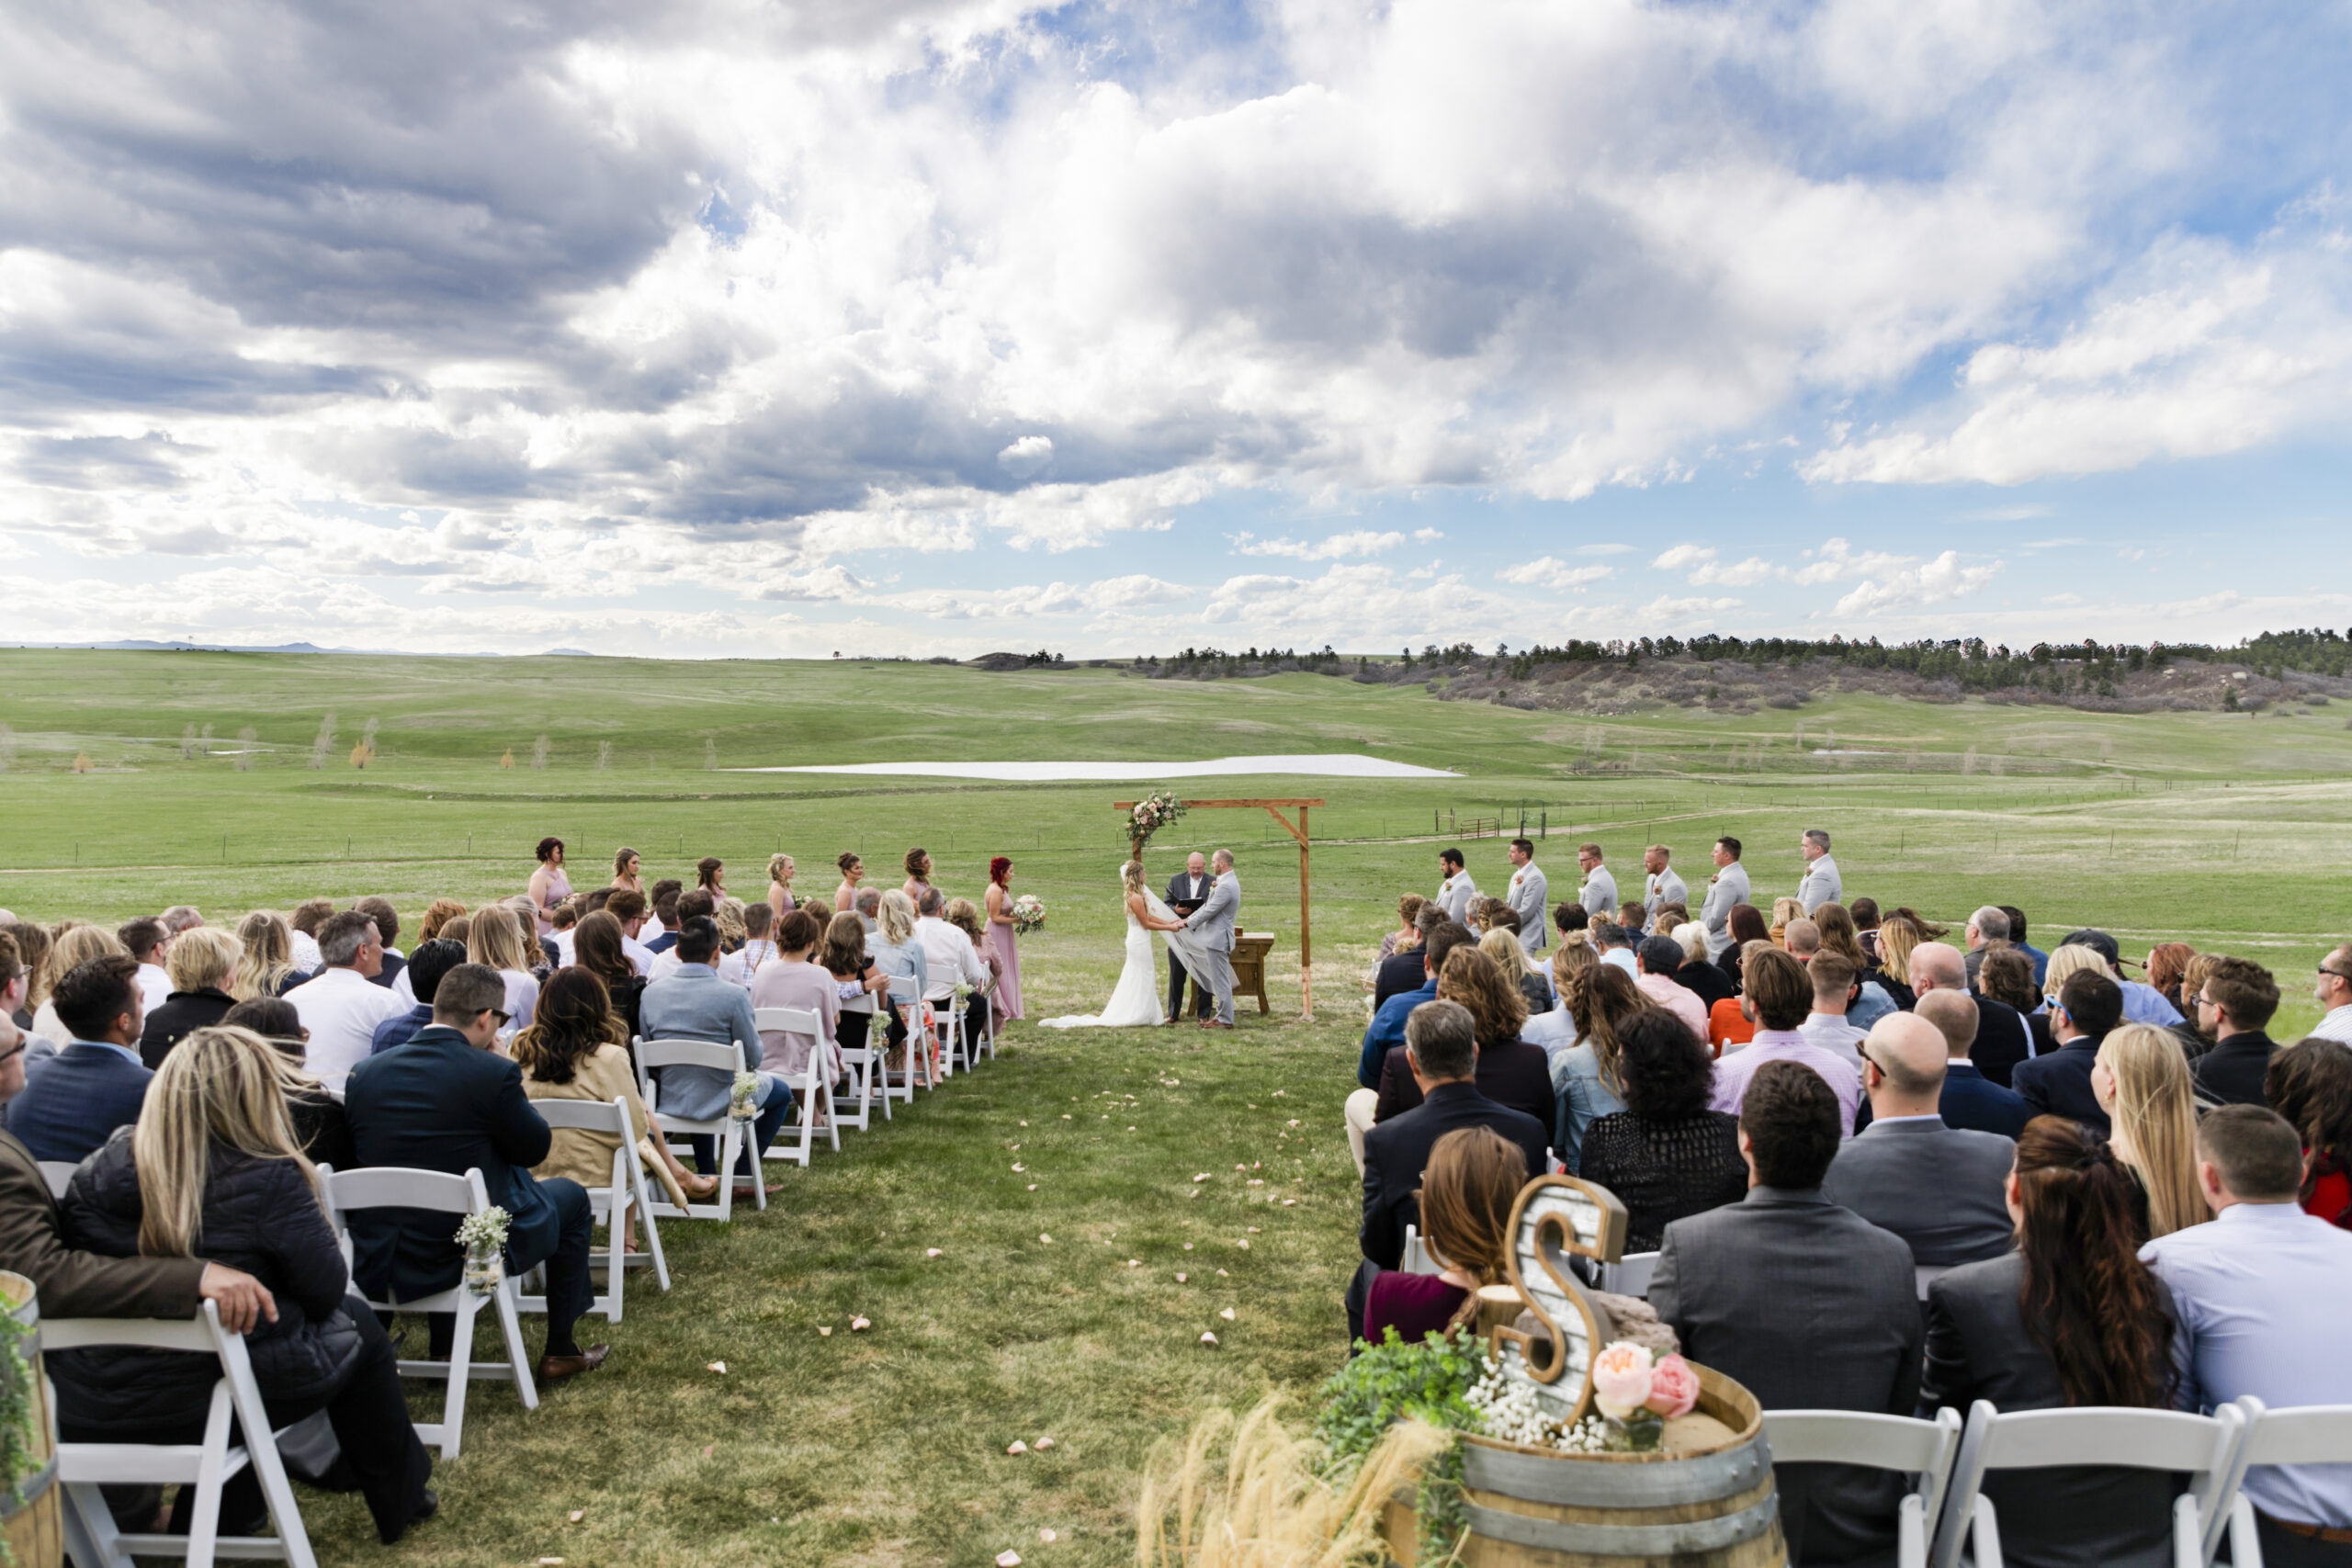 A couple gets married on a green field with a dramatic sky behind them.